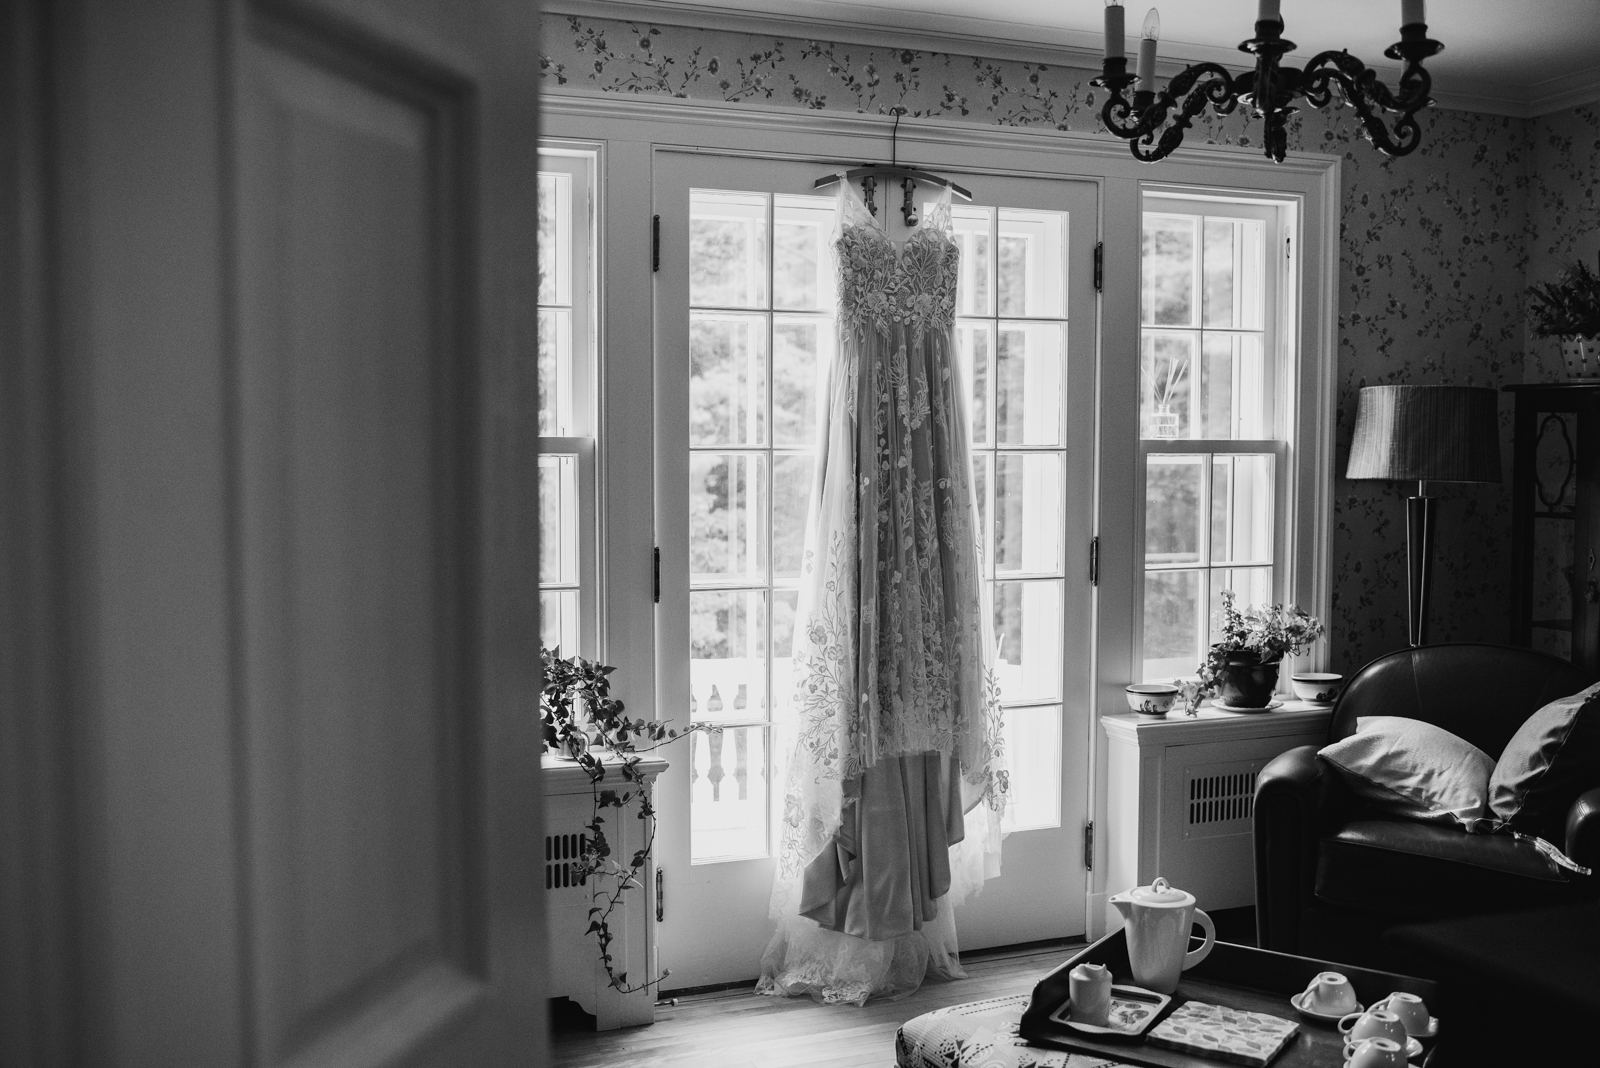 wedding dress hanging from window sill in black and white